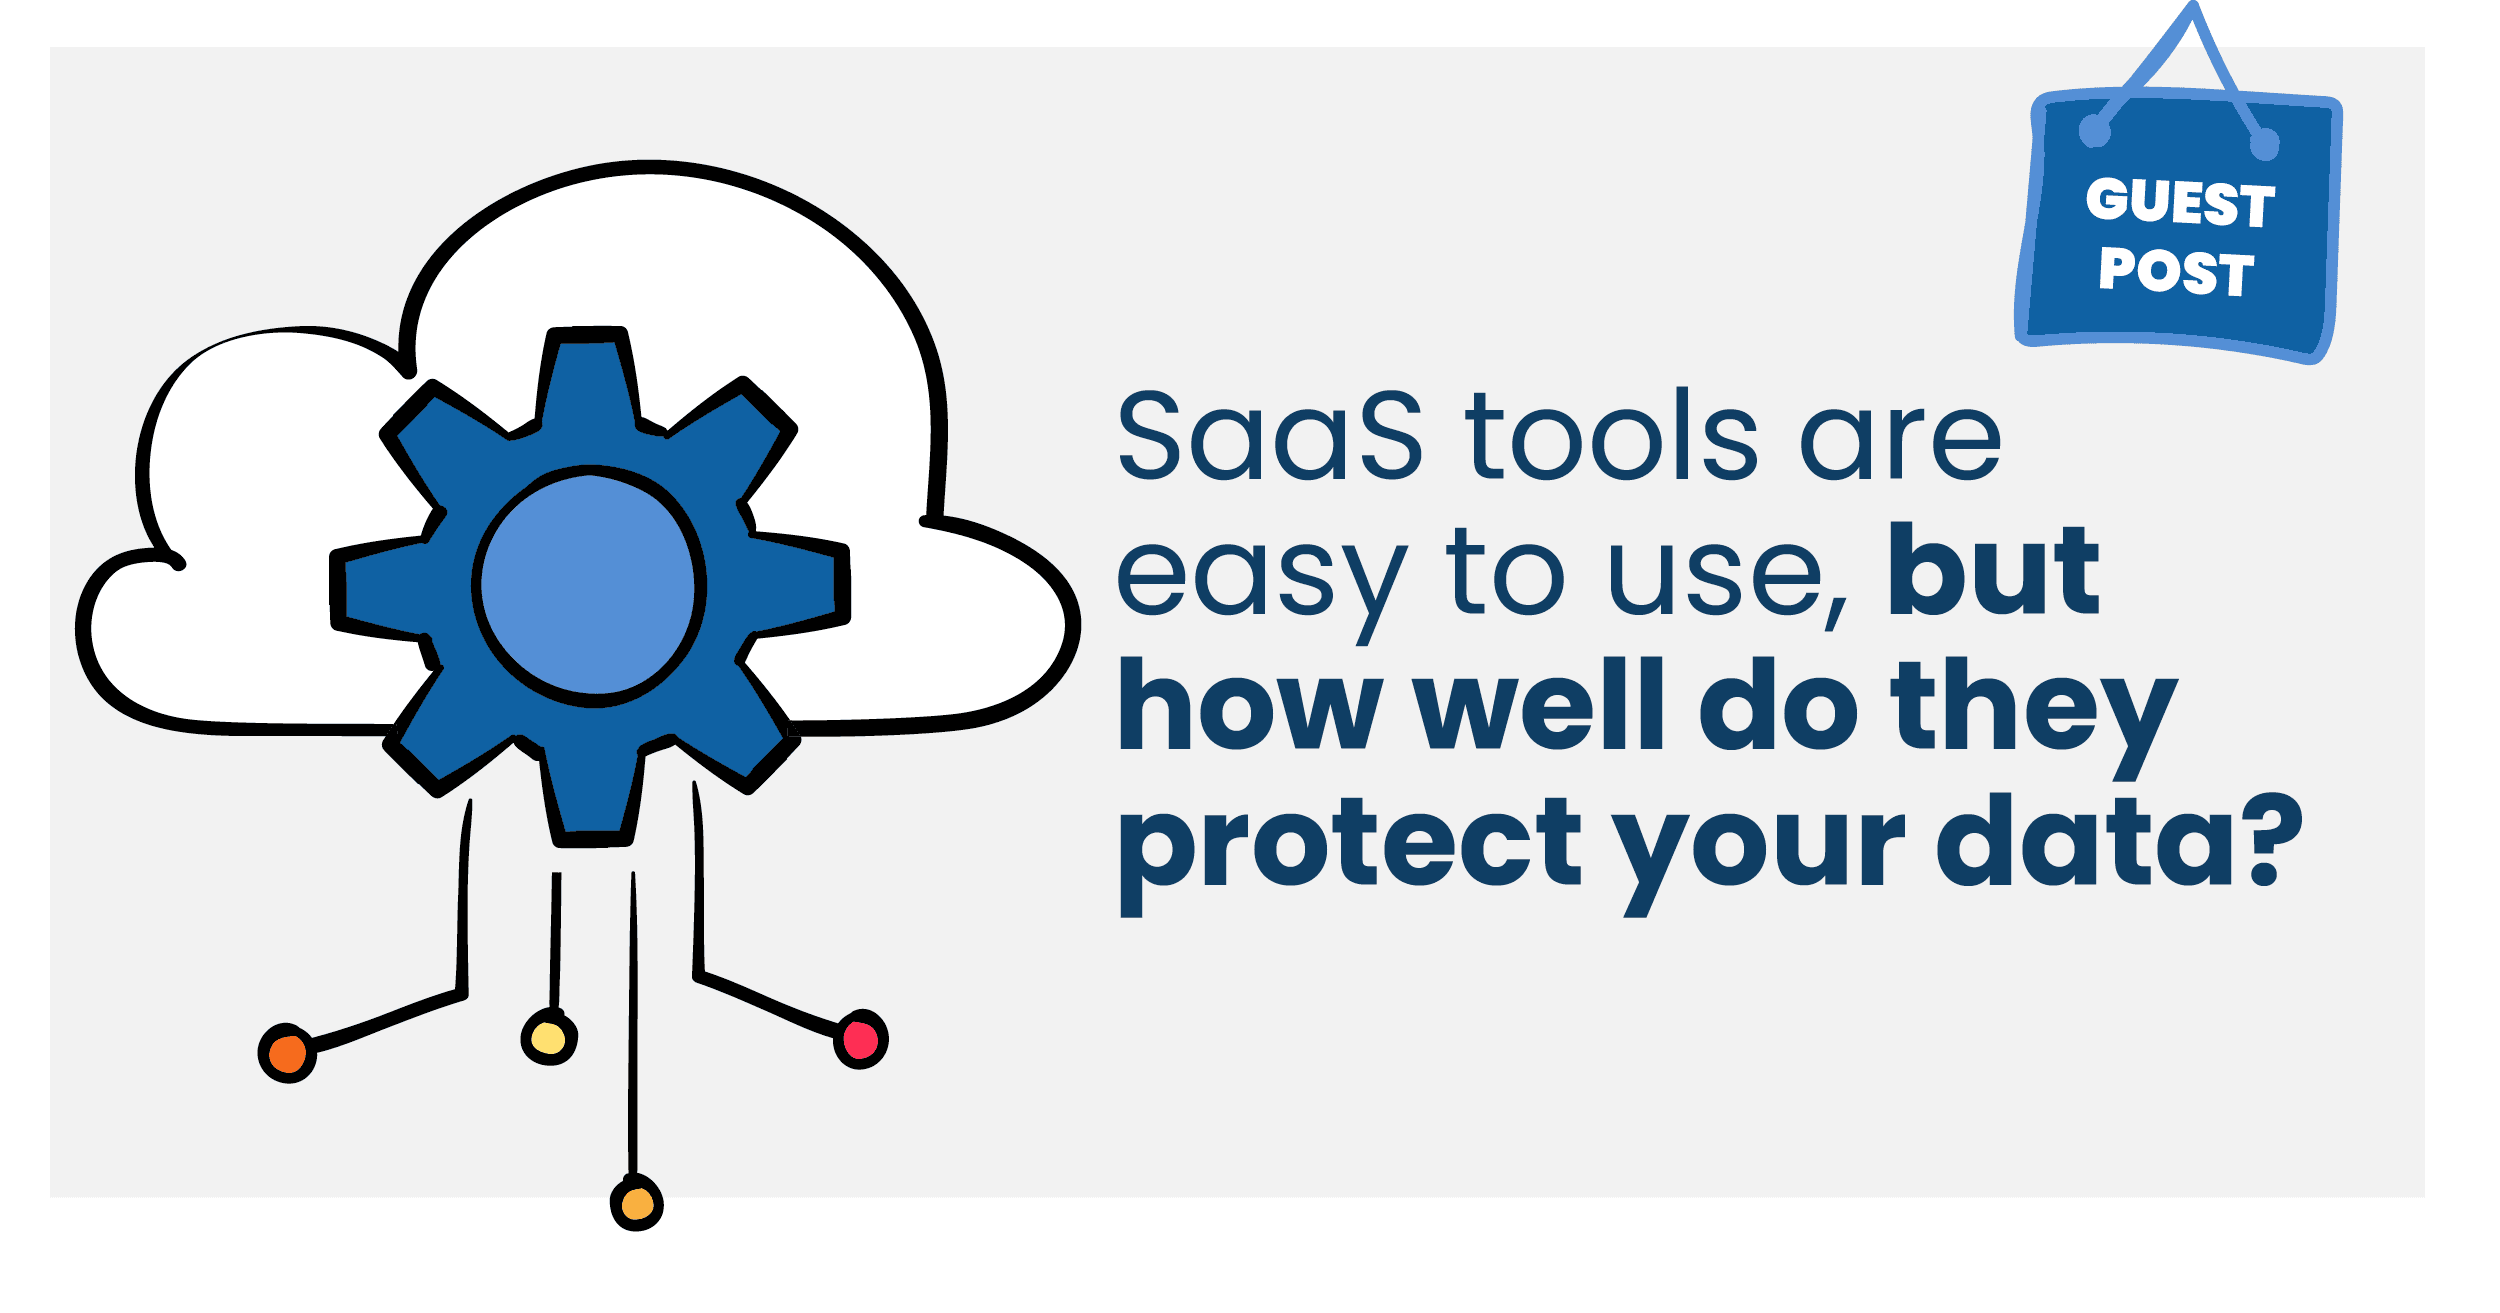 Guest post: SaaS tools are easy to use, but how well do they protect your data?